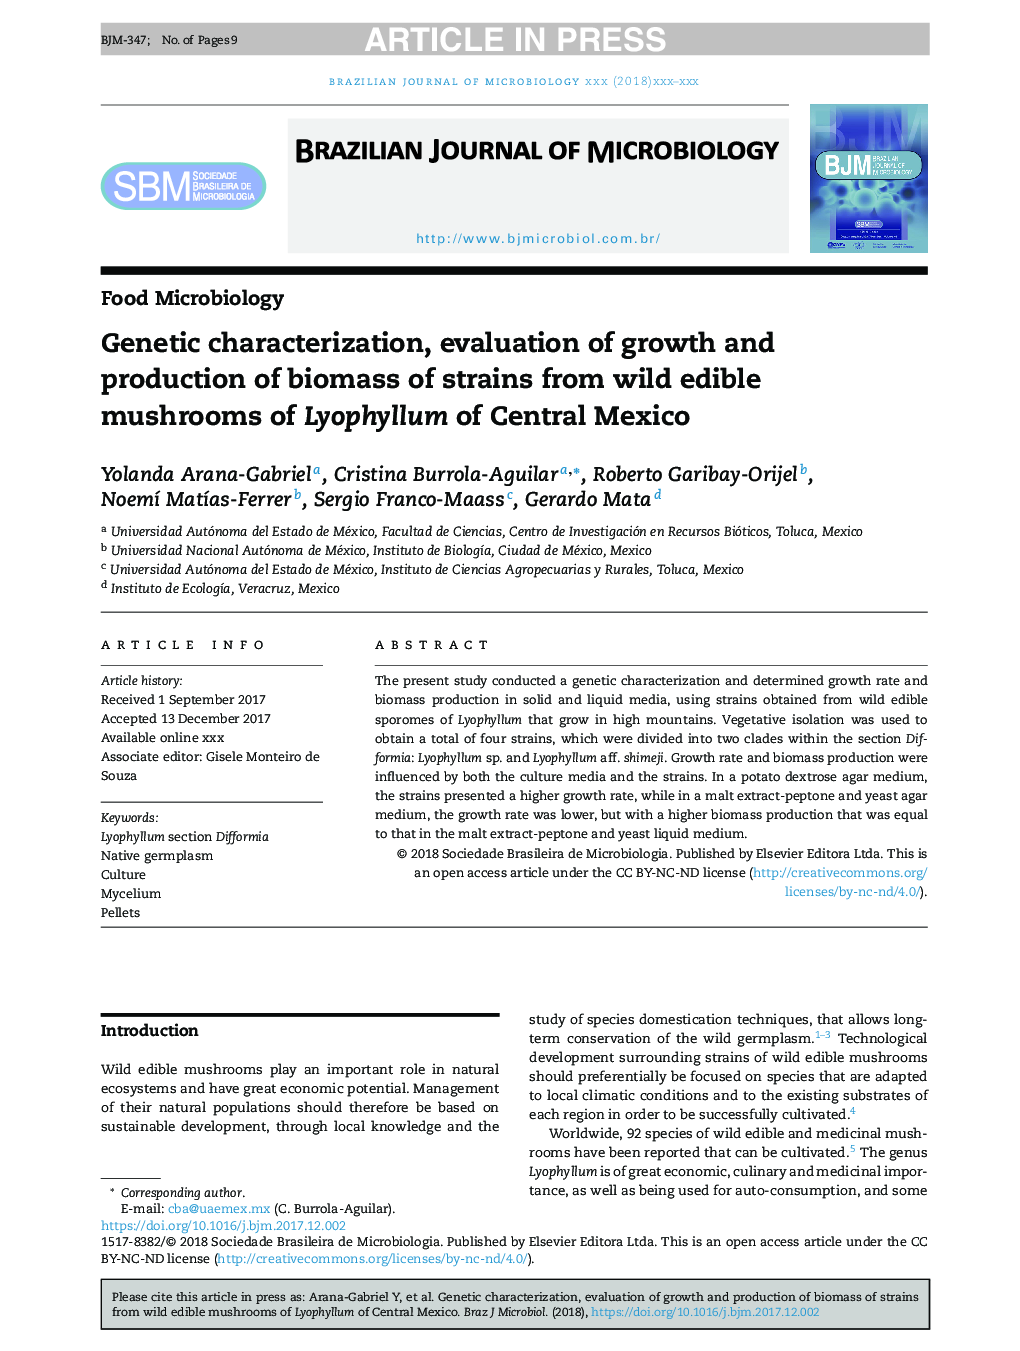 Genetic characterization, evaluation of growth and production of biomass of strains from wild edible mushrooms of Lyophyllum of Central Mexico